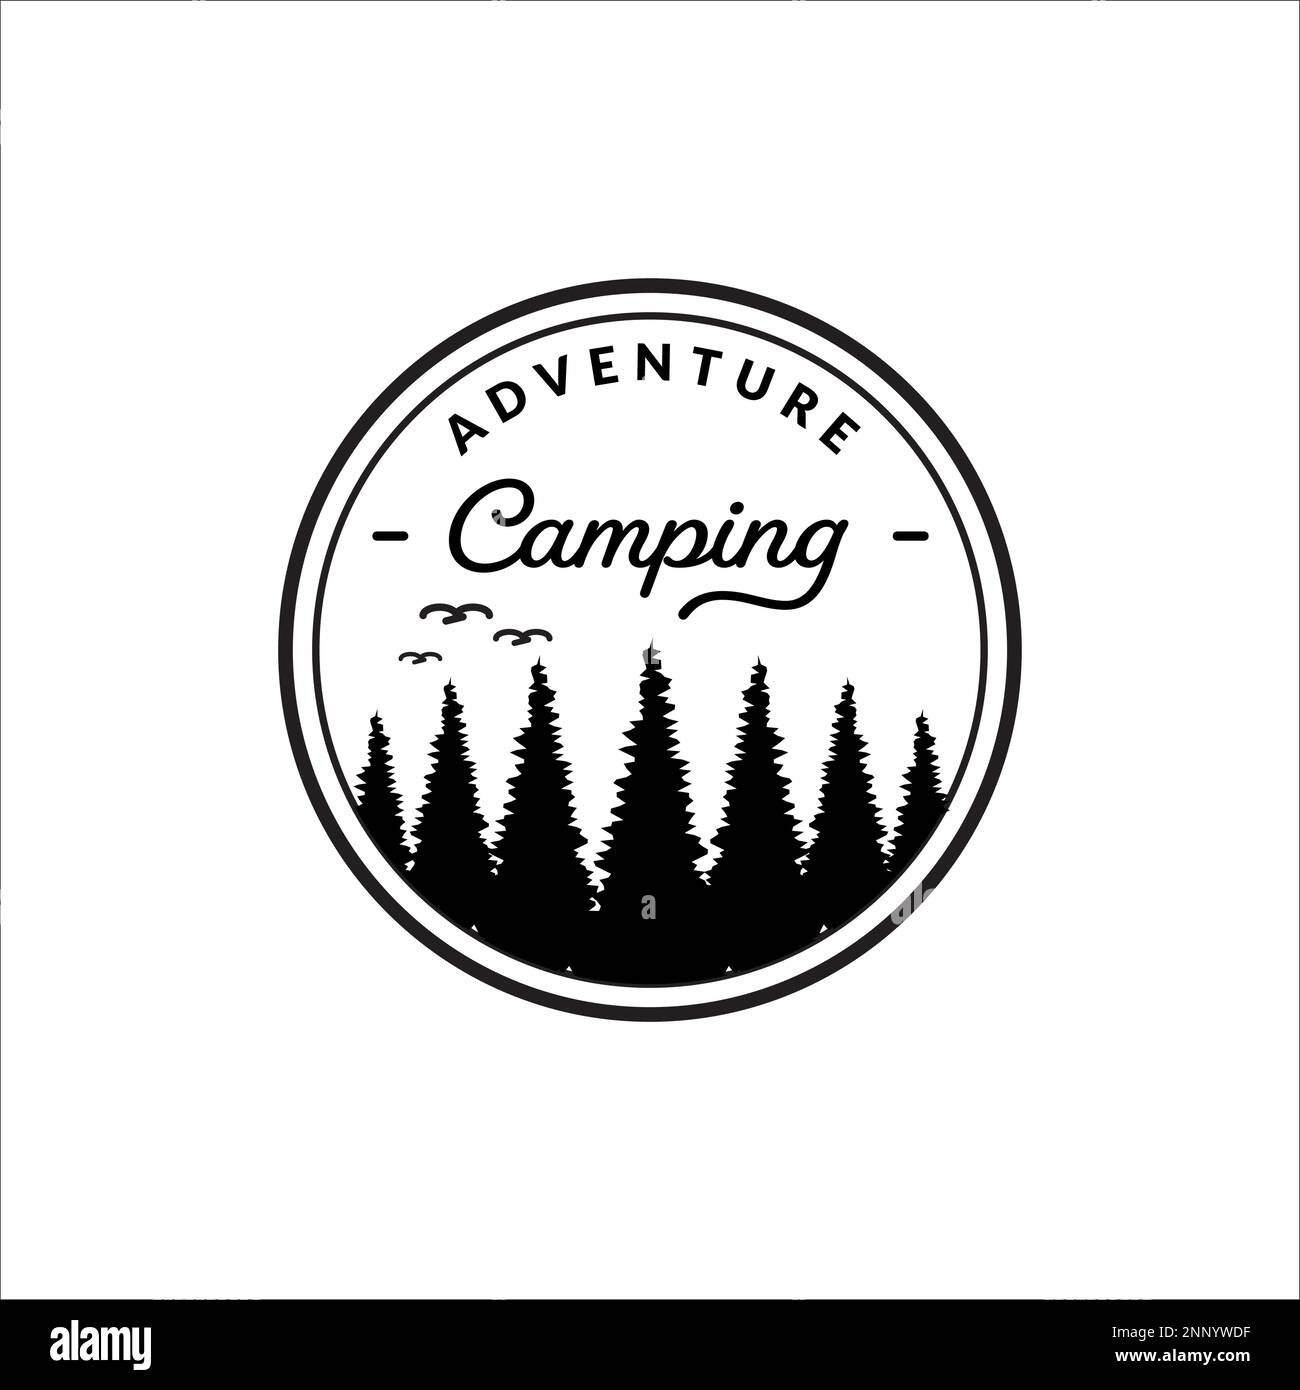 vintage logo camping badge, camping in the wilderness Stock Vector